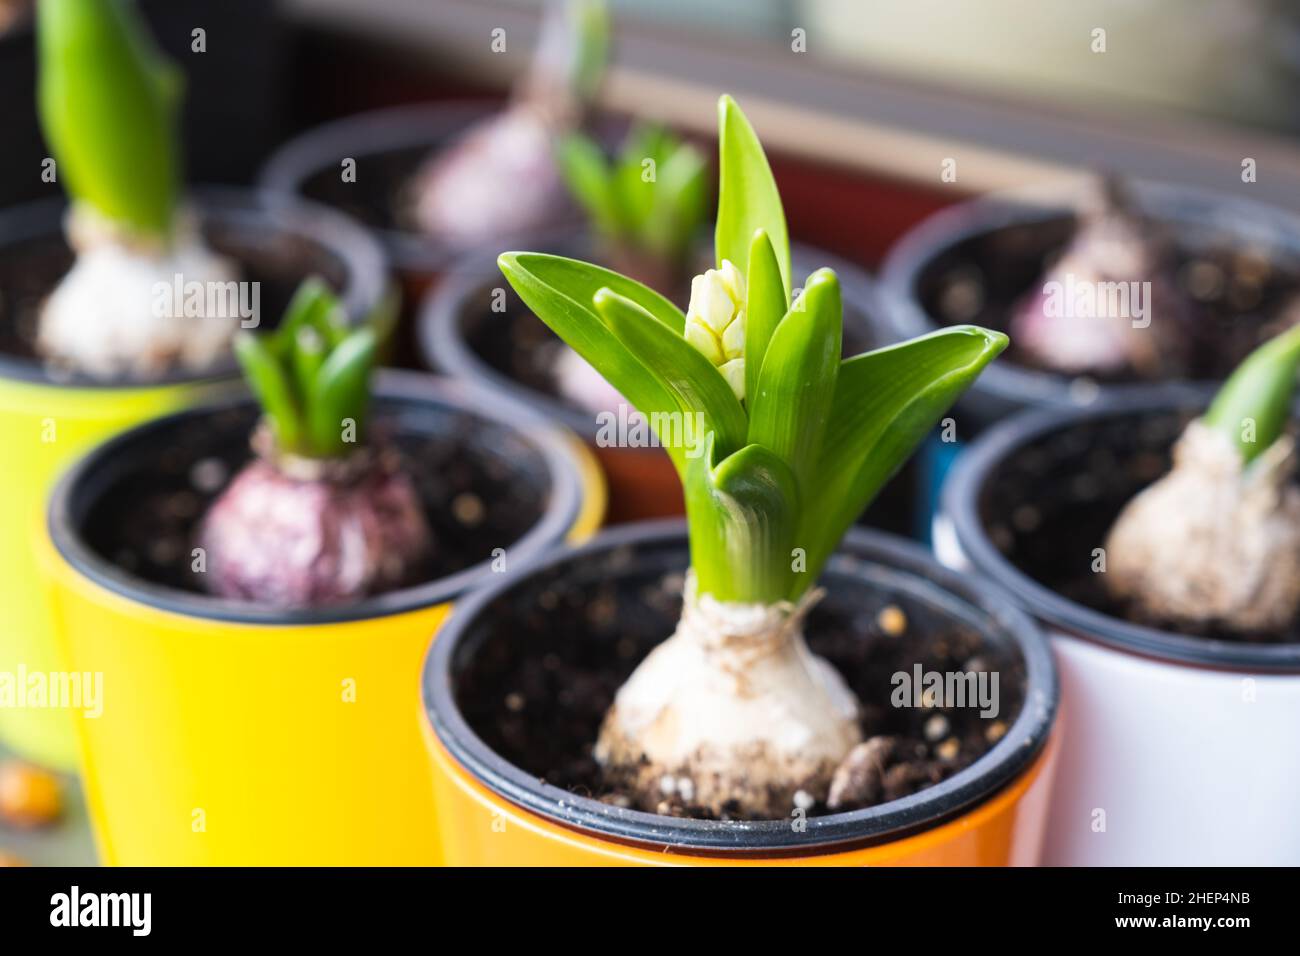 Hyacinth bulbs growing in flower pots. Spring flowers on the windowsill Stock Photo